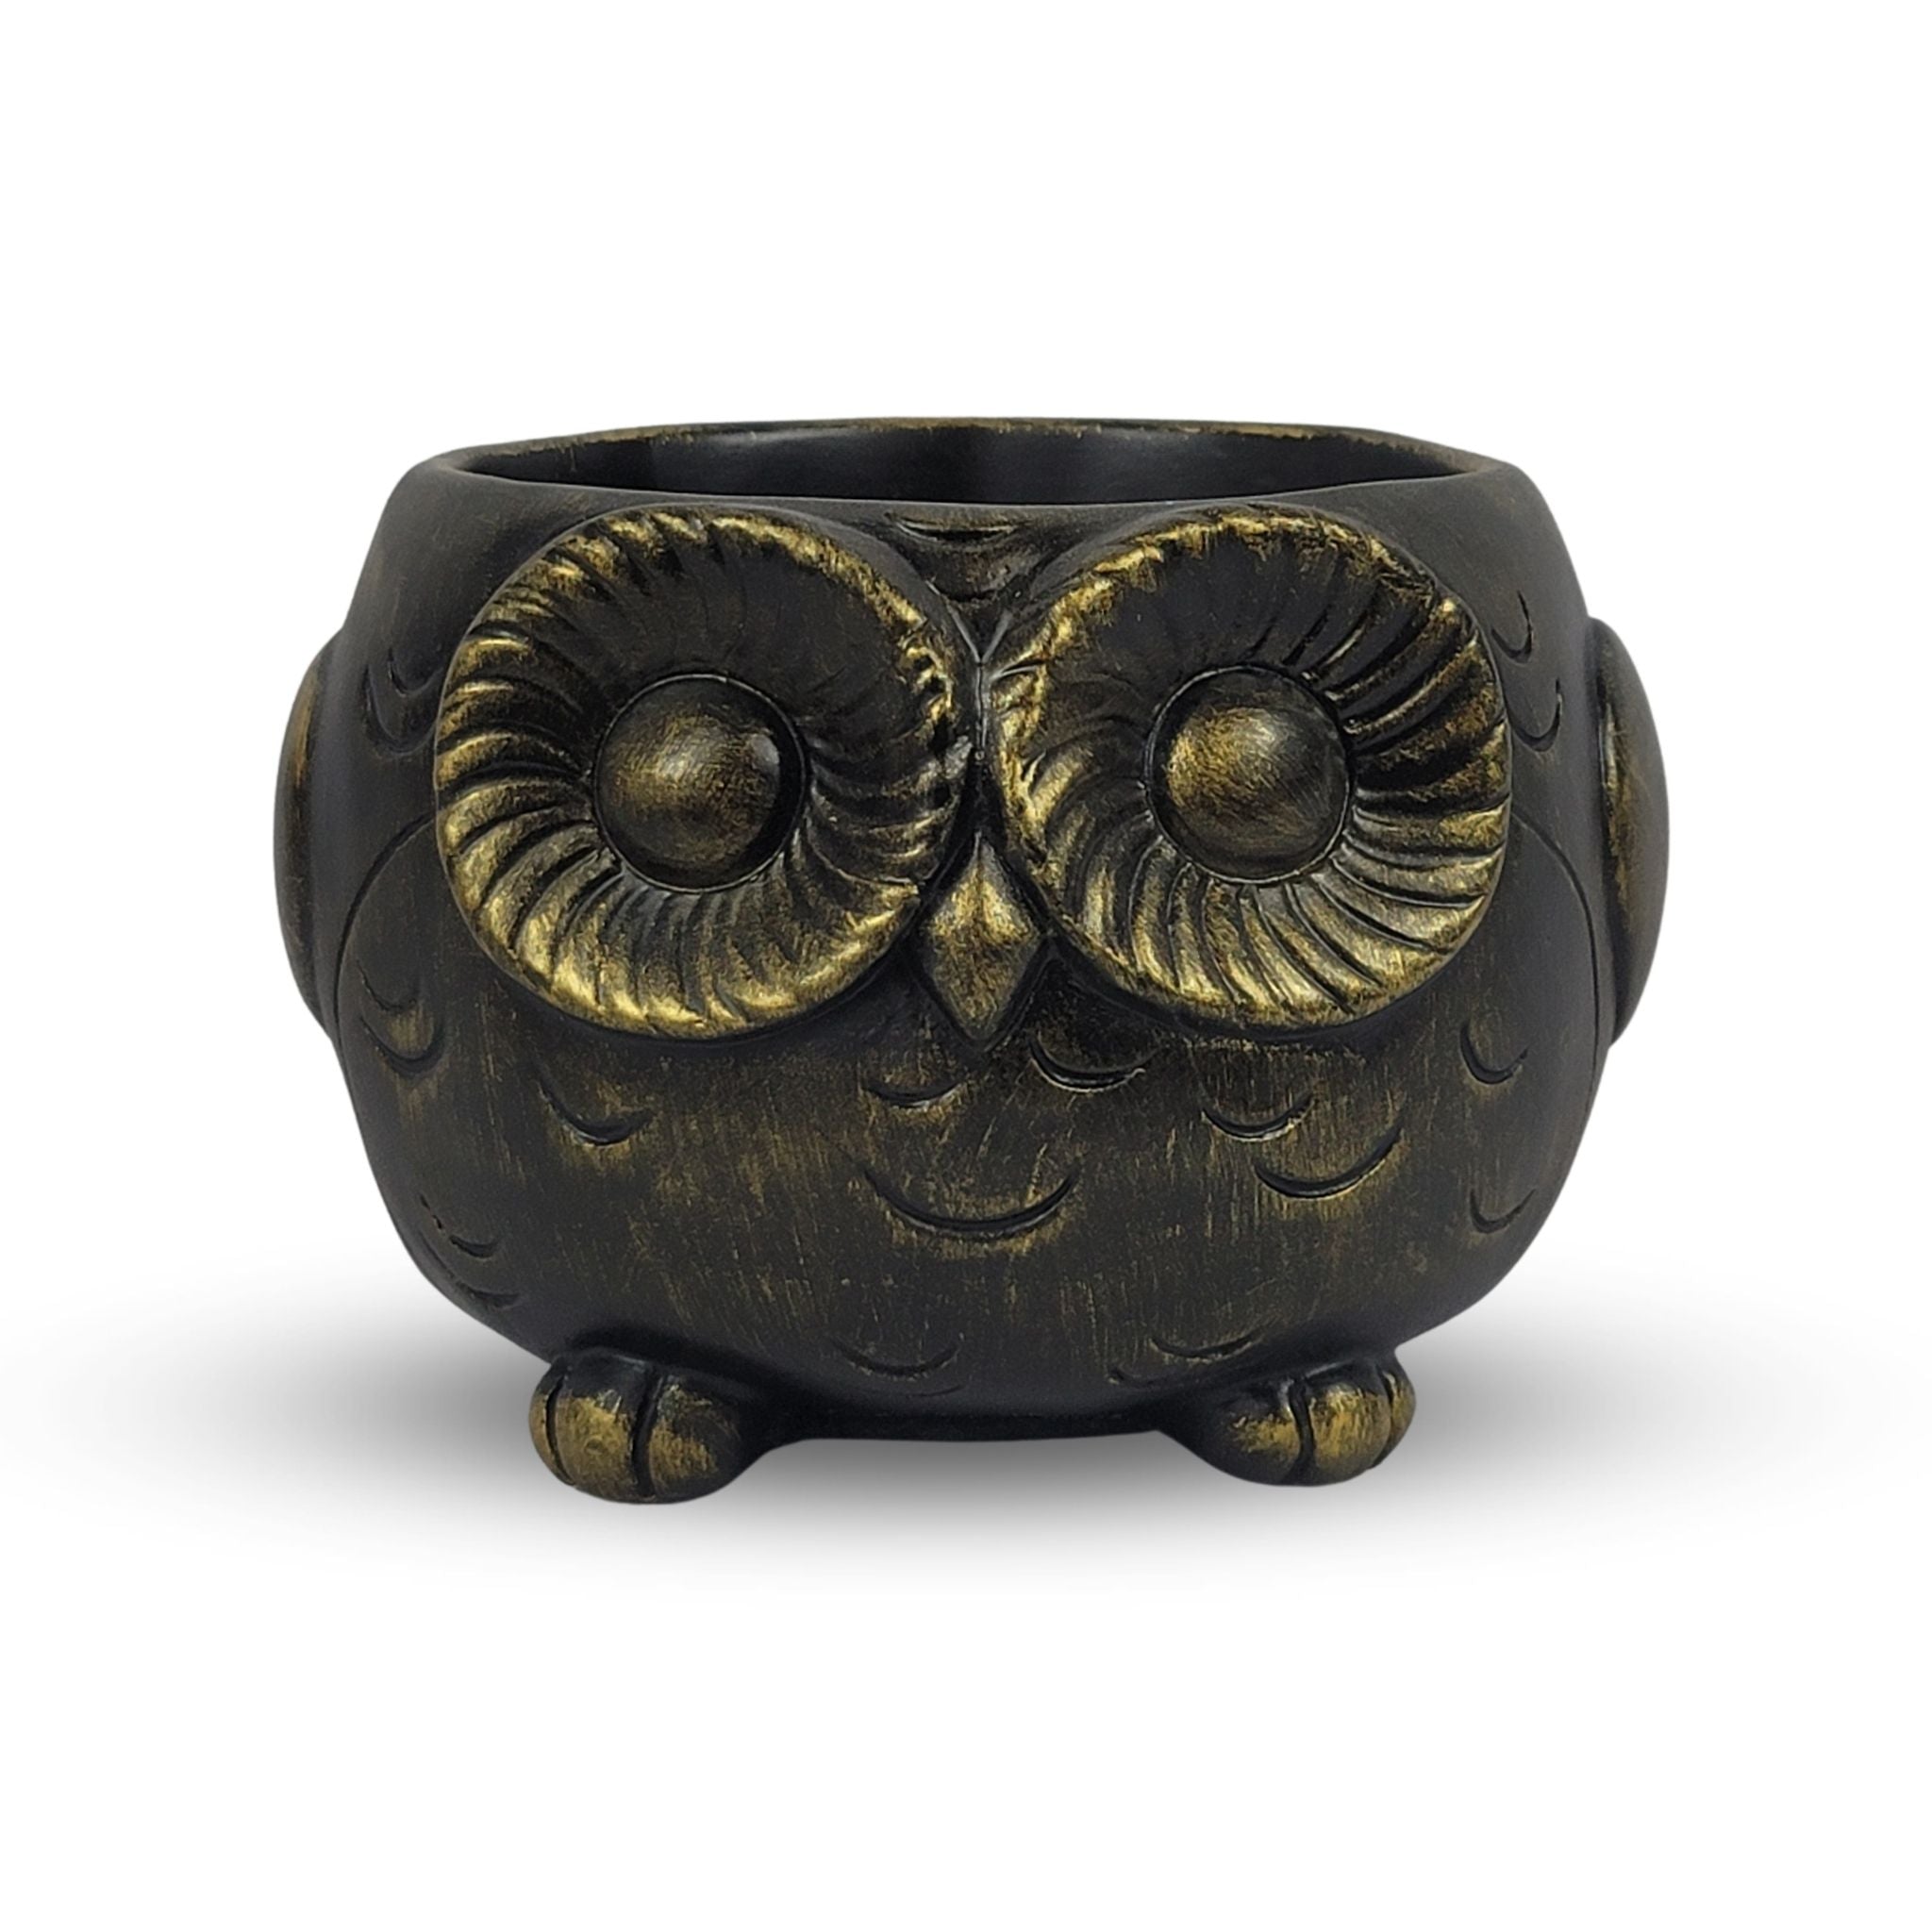 Wise Wings Owl Planter - Black Gold